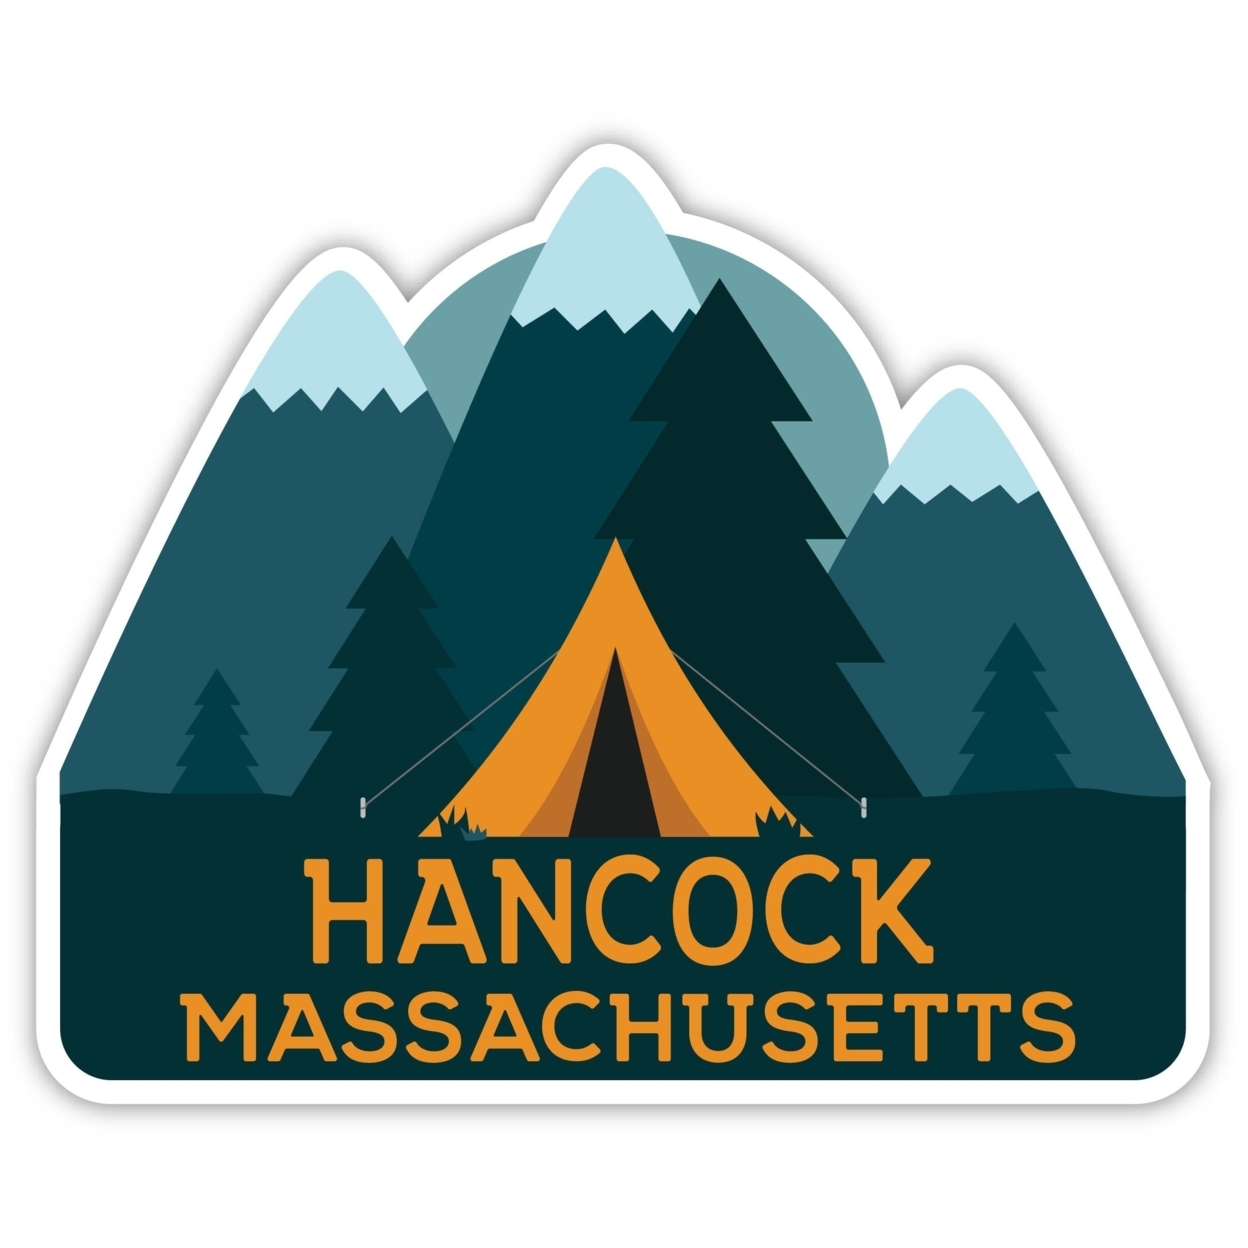 Hancock Massachusetts Souvenir Decorative Stickers (Choose Theme And Size) - 4-Pack, 4-Inch, Great Outdoors